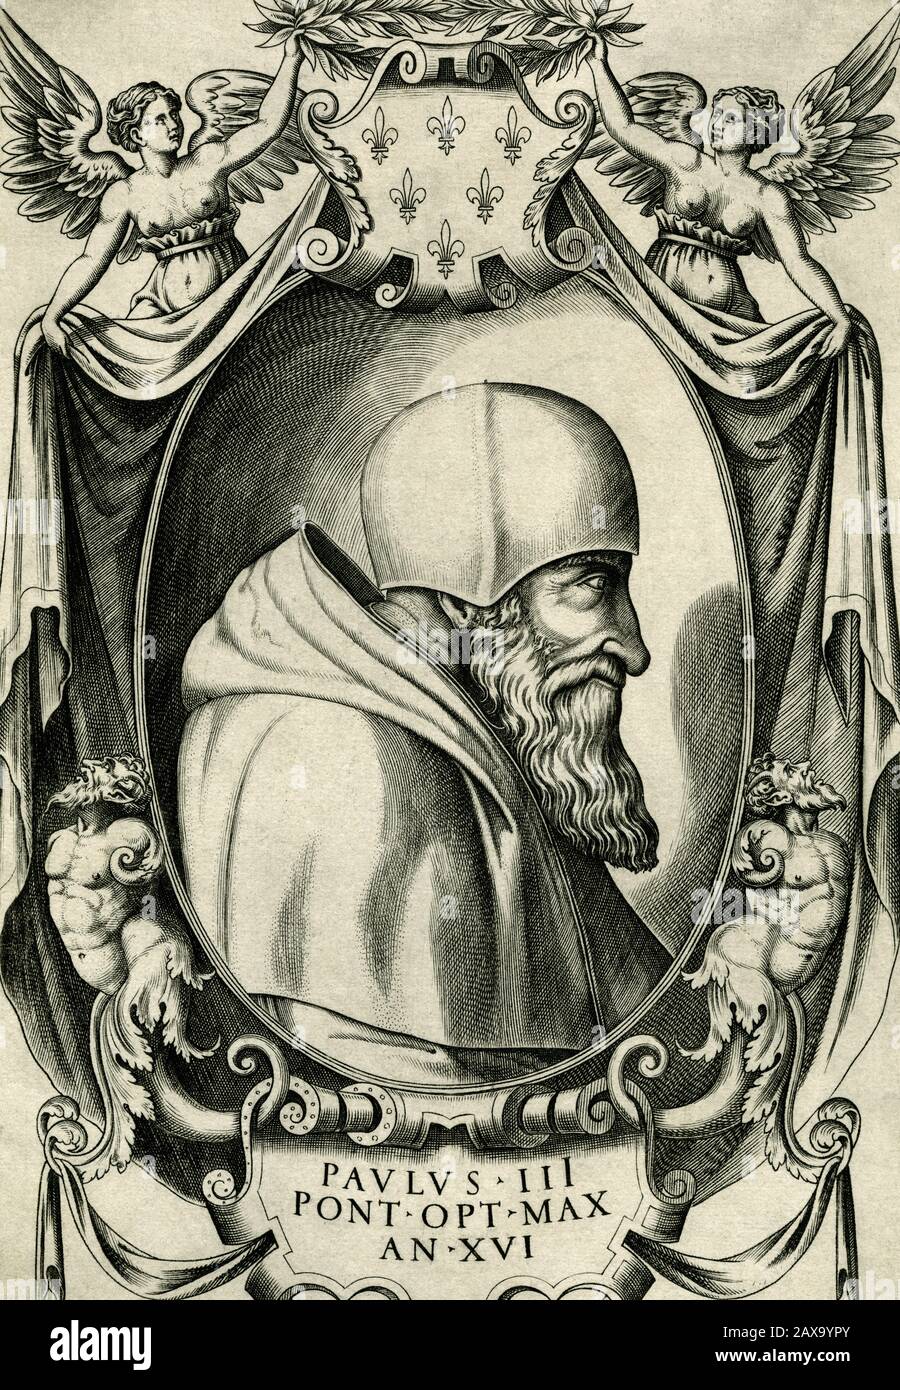 Pope Paul III (1468-1549) who led the Counter-Reformation and was a significant patron of the arts.  Copperplate engraving created in the 1600s by engraver and printmaker Friedrich von Hulsen (c.1580-1665).   Pope Paul III established new religious orders, such as the Jesuits and the Barnabites, and convened the Council of Trent in 1545. He supported the Renaissance movement and Michelangelo's depiction of the Last Judgement was completed in the Sistine Chapel of the Vatican during his reign; he also appointed the ailing Michelangelo to supervise the rebuilding of St Peter's Basilica. Stock Photo